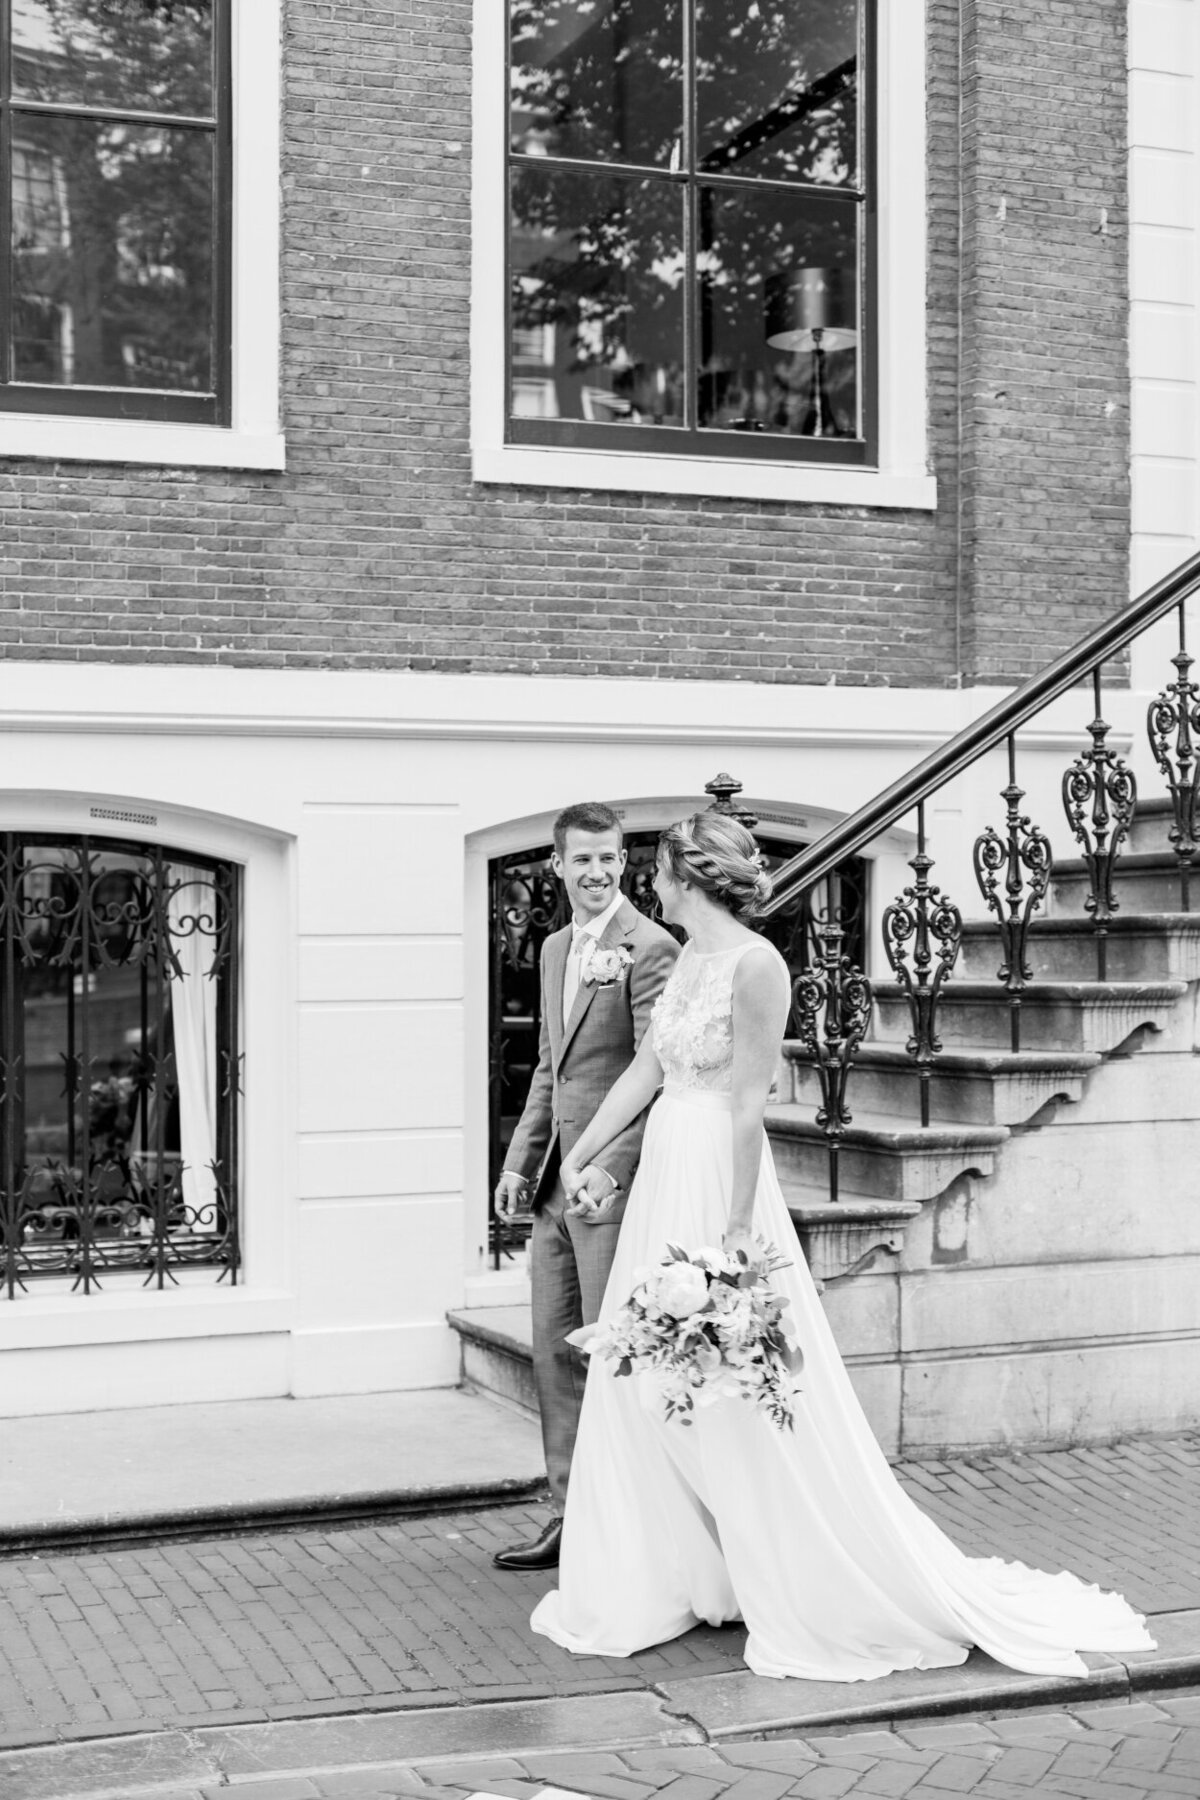 Black and white wedding portrait of the bride and groom in Amsterdam for their city elopement for a photoshoot organized by Lovely & Planned